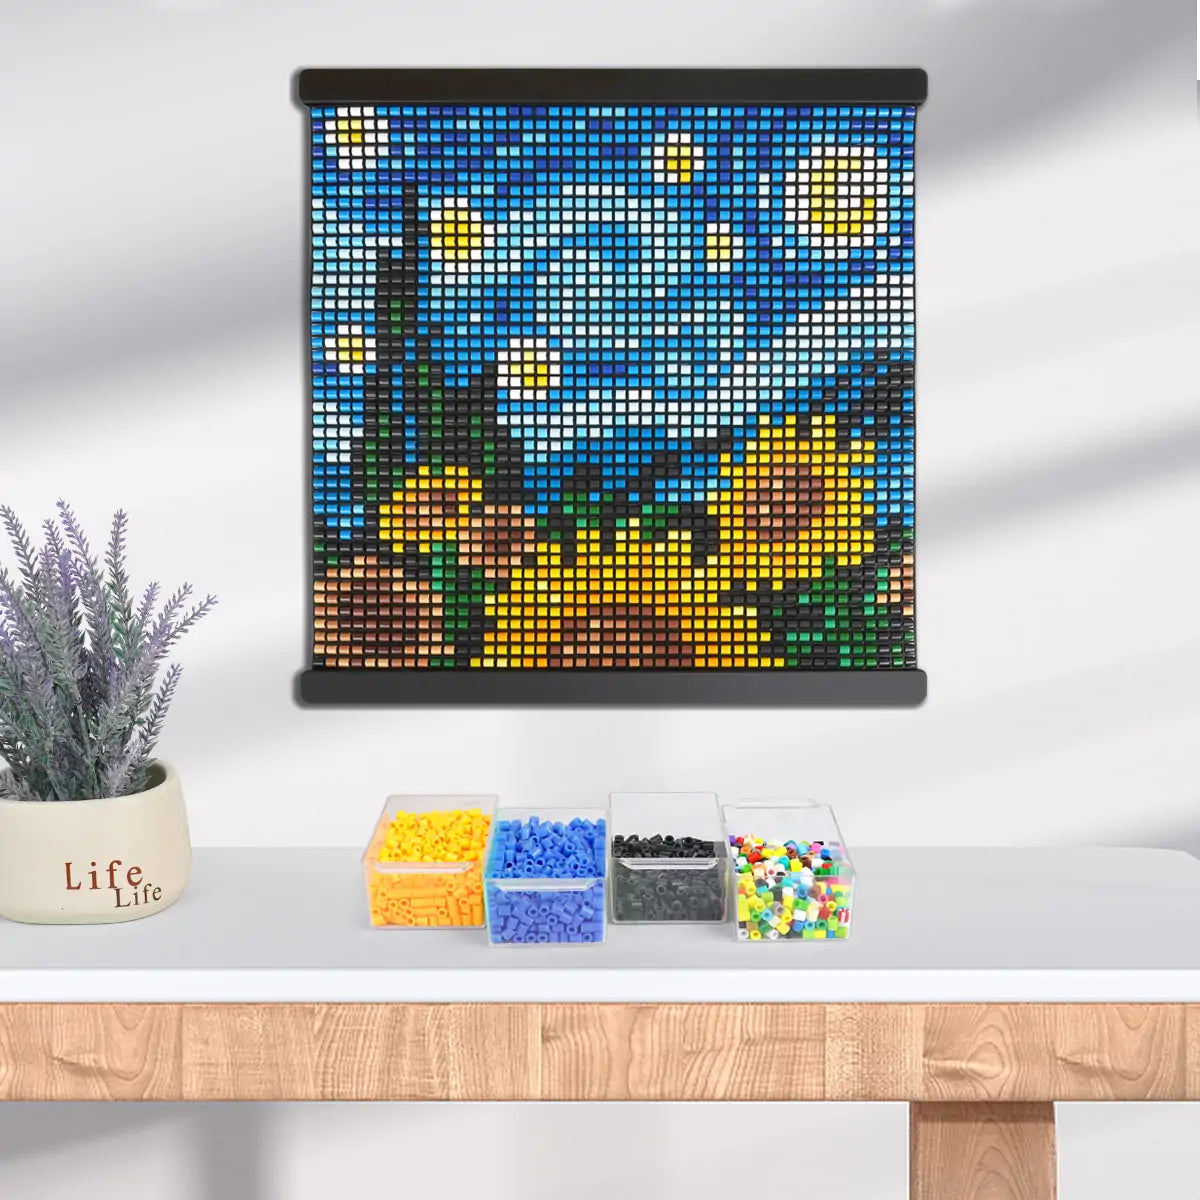 The Starry Night Mixed Sunflowers Grid Kit